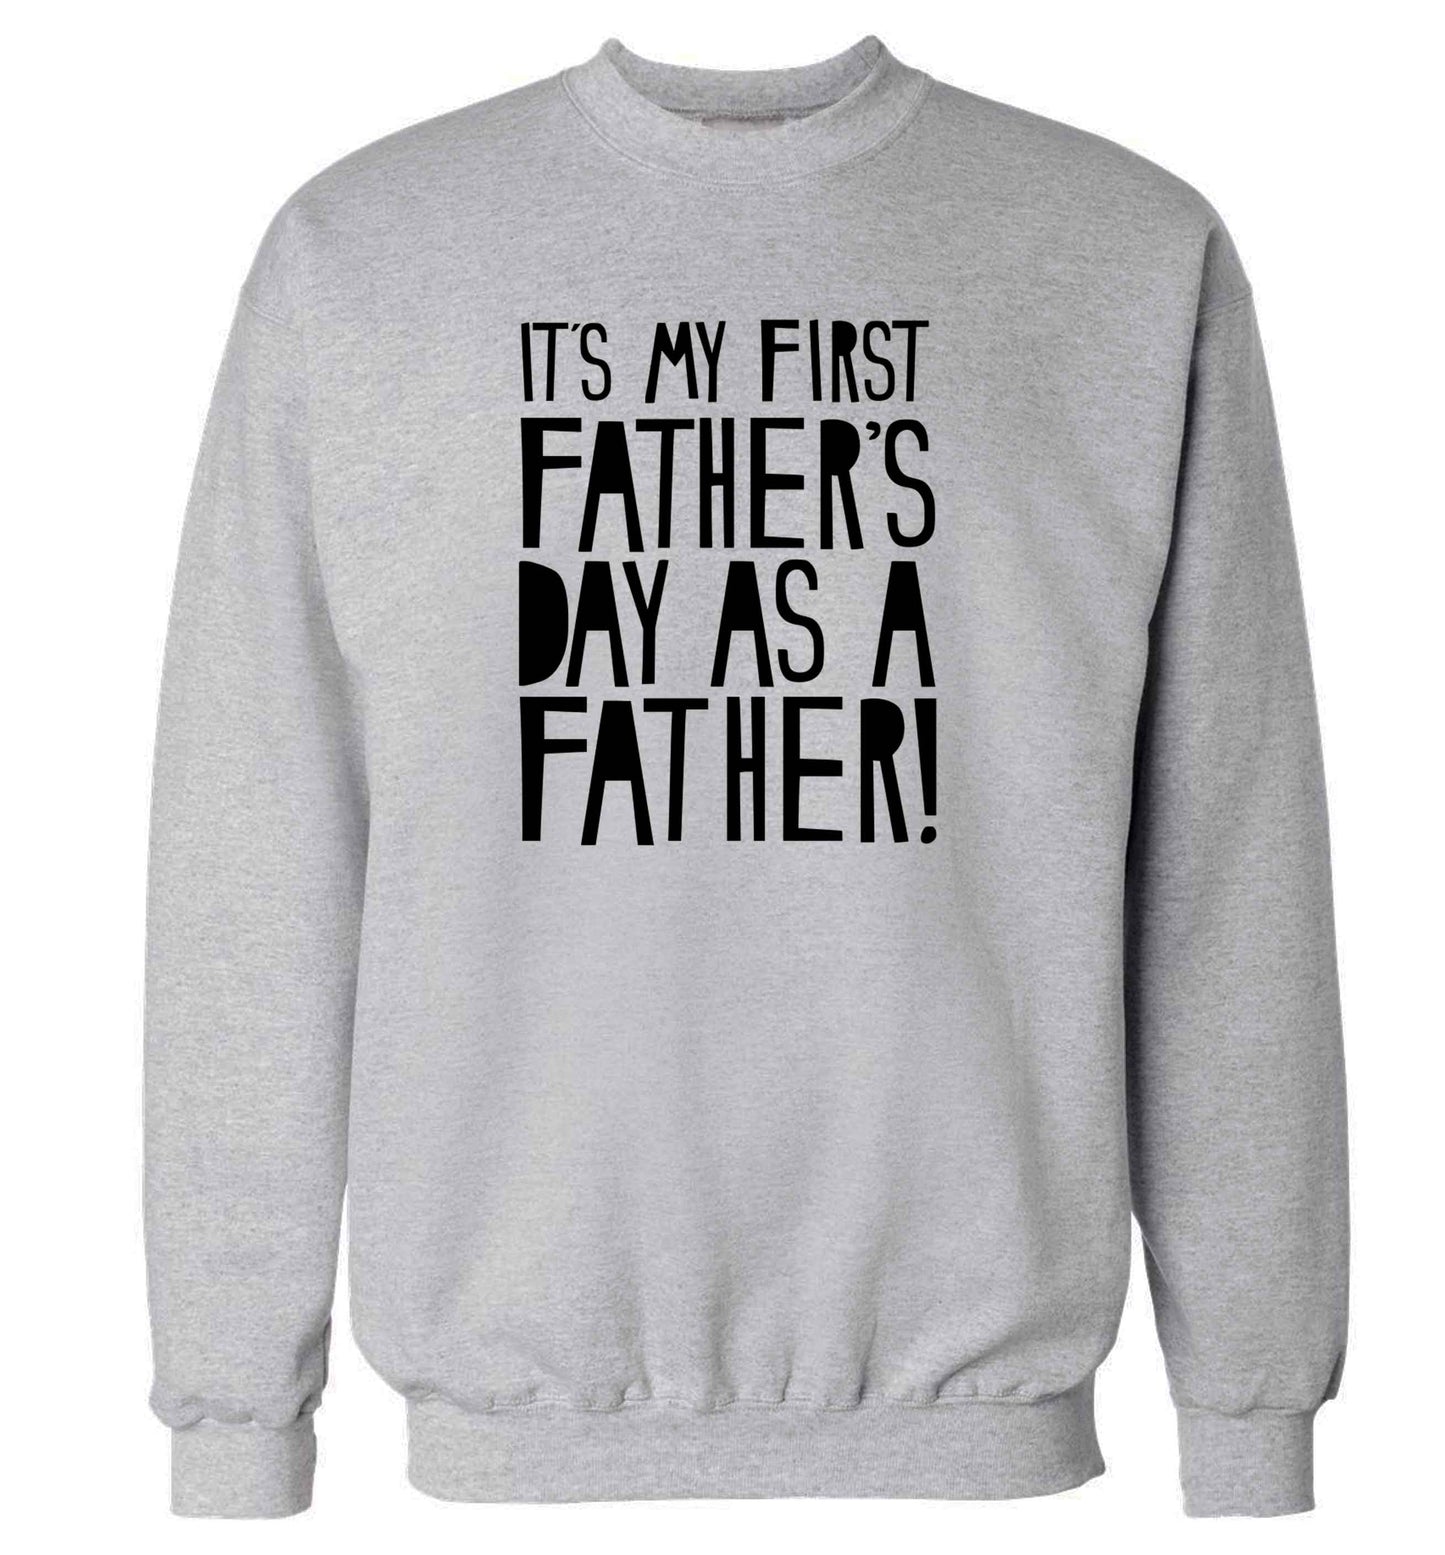 It's my first father's day as a father! adult's unisex grey sweater 2XL